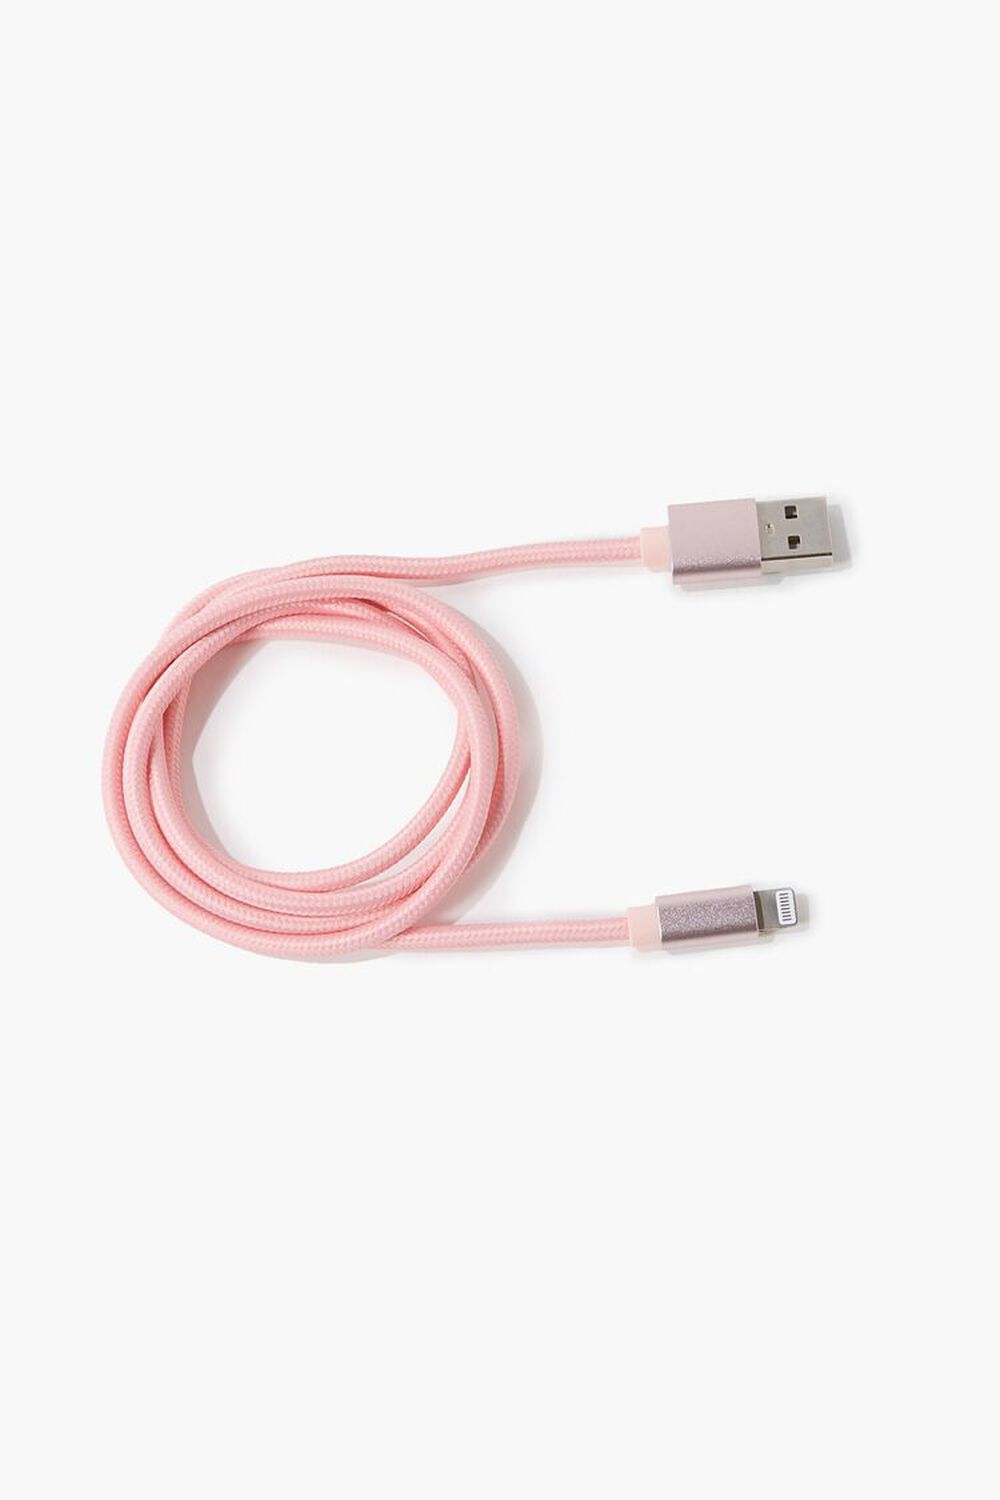 iPhone Charger Cord, image 1